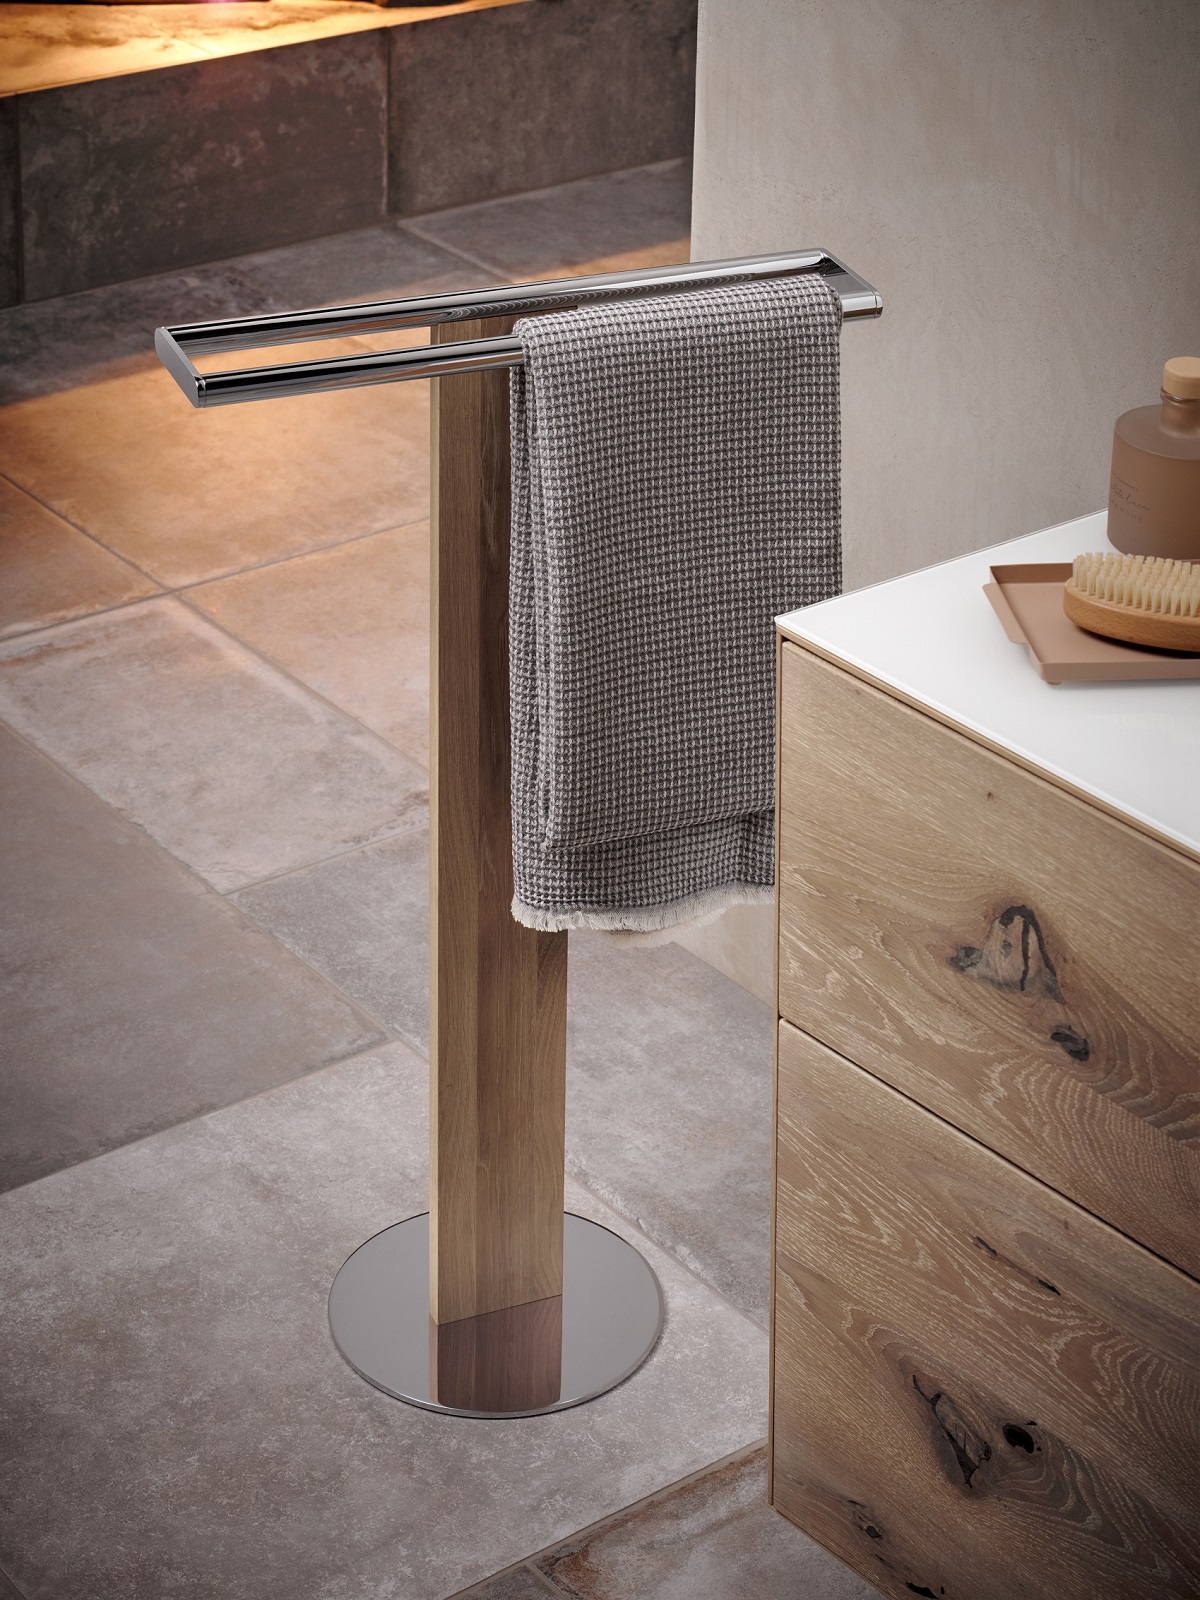 freestanding towel rail in wood and chrome in lignatur edition for keuco